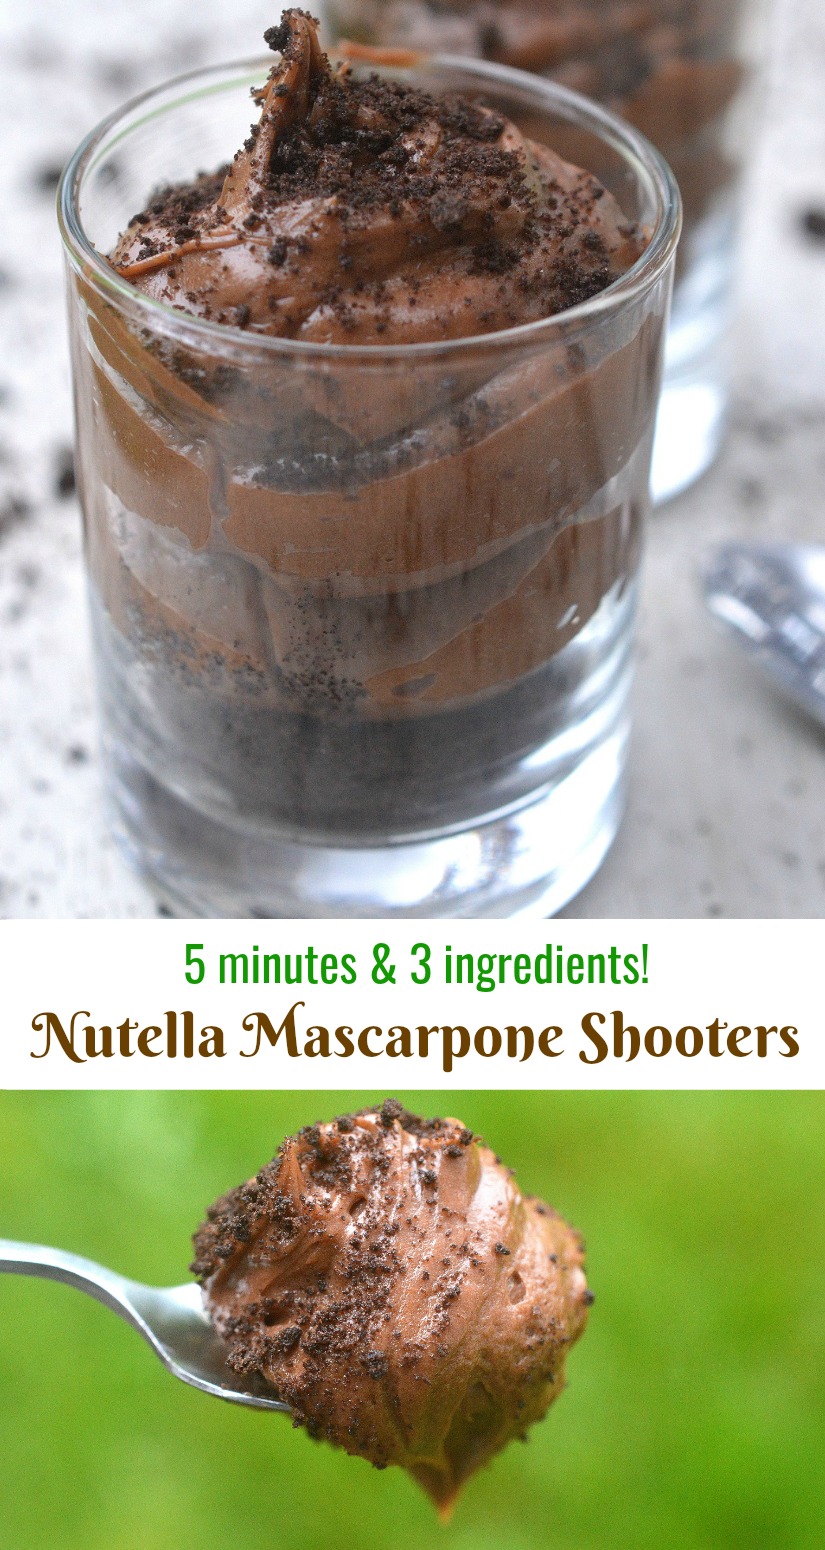 3 Ingredient Nutella Mascarpone Shooters, creamy, OMG delicious and just 5 minutes to make!